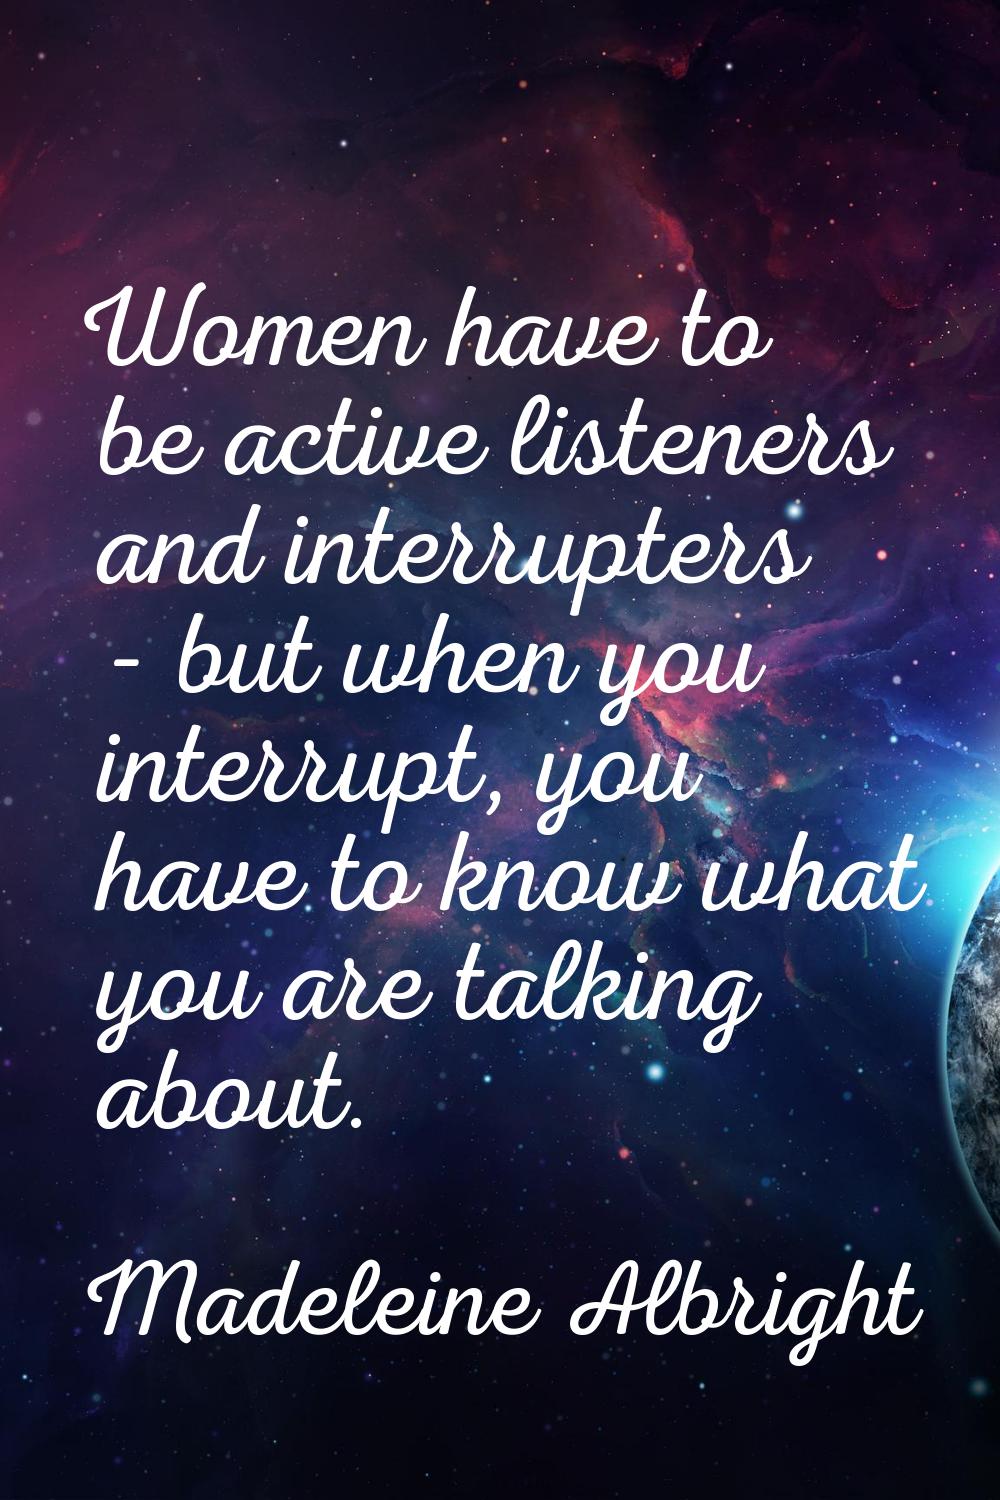 Women have to be active listeners and interrupters - but when you interrupt, you have to know what 